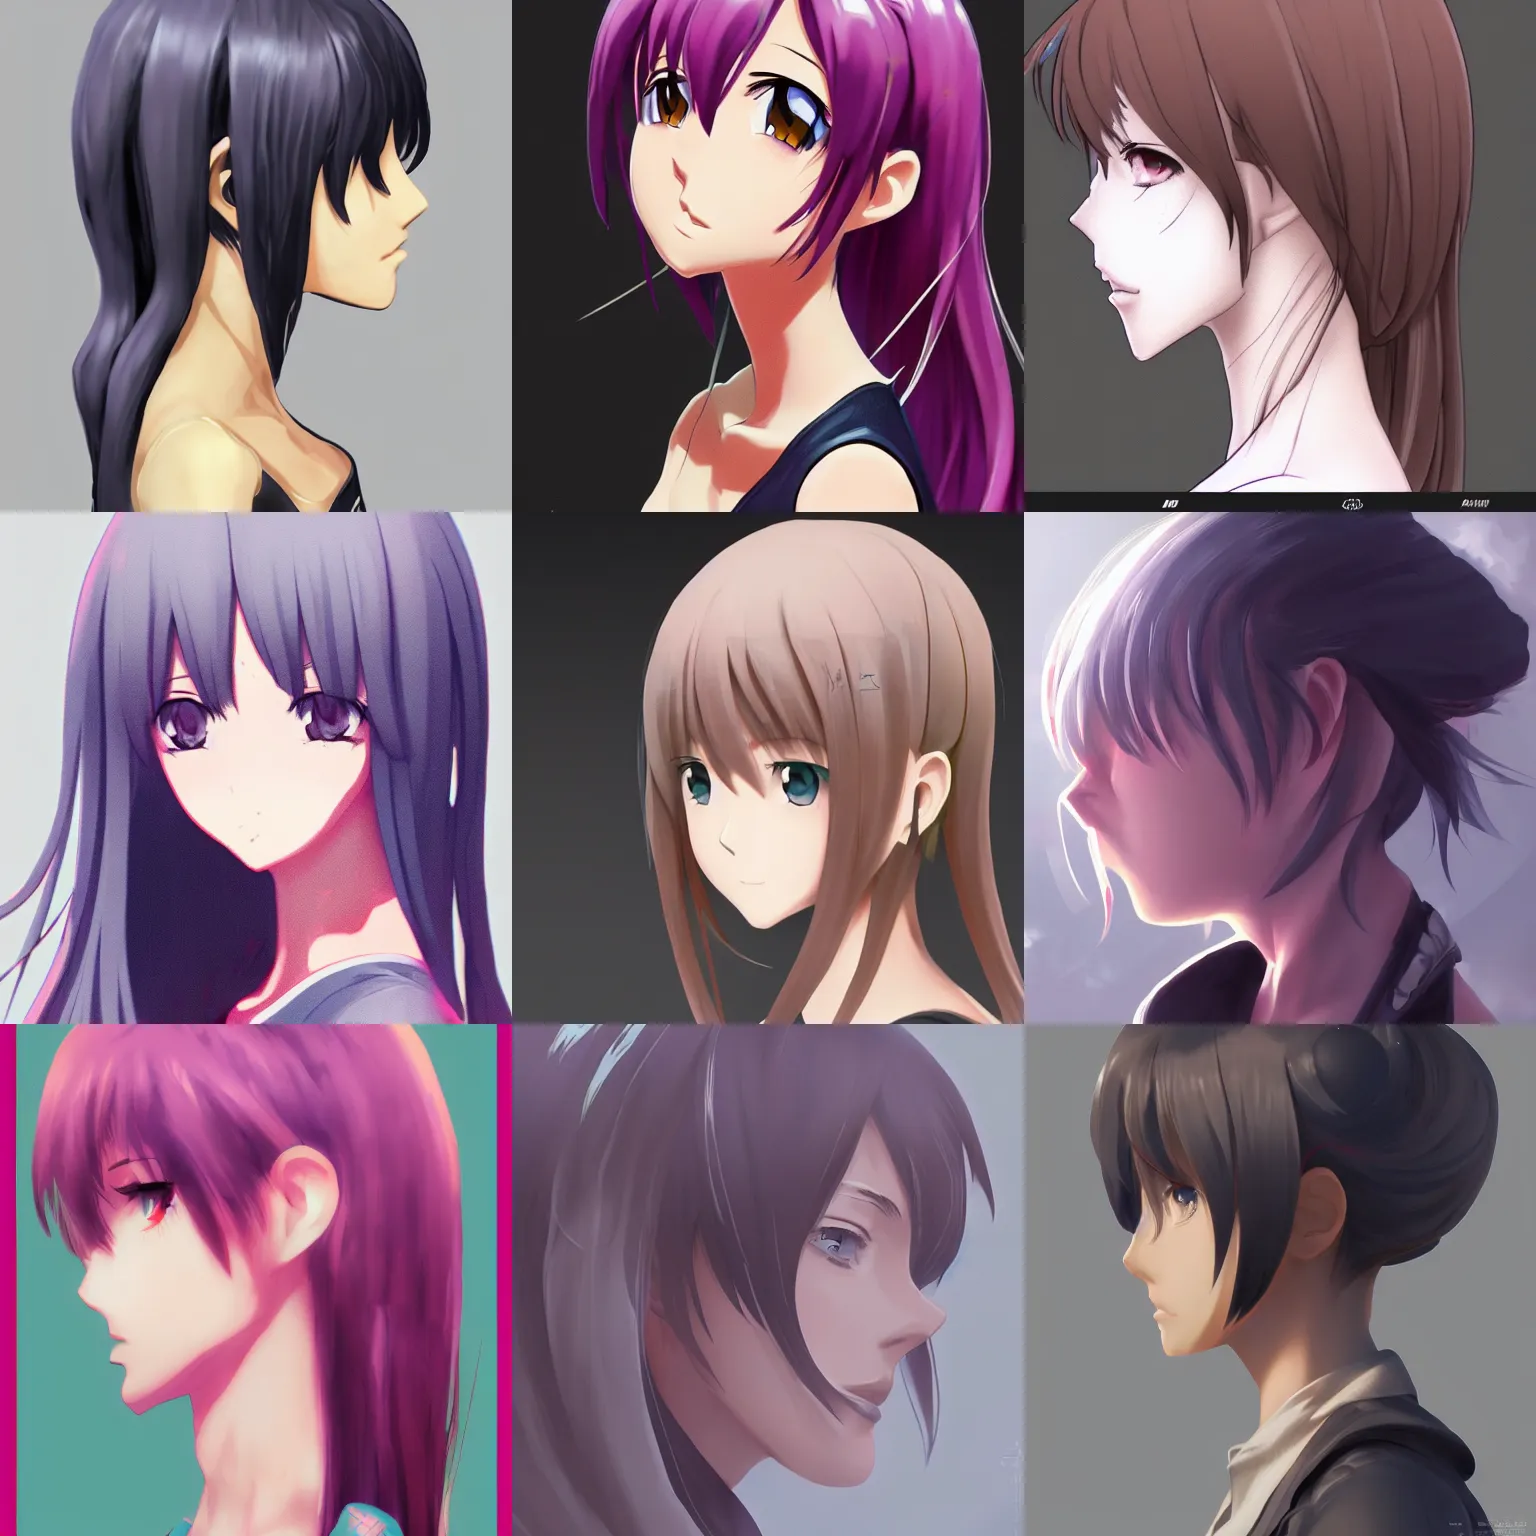 100+] Anime Girl Profile Pictures